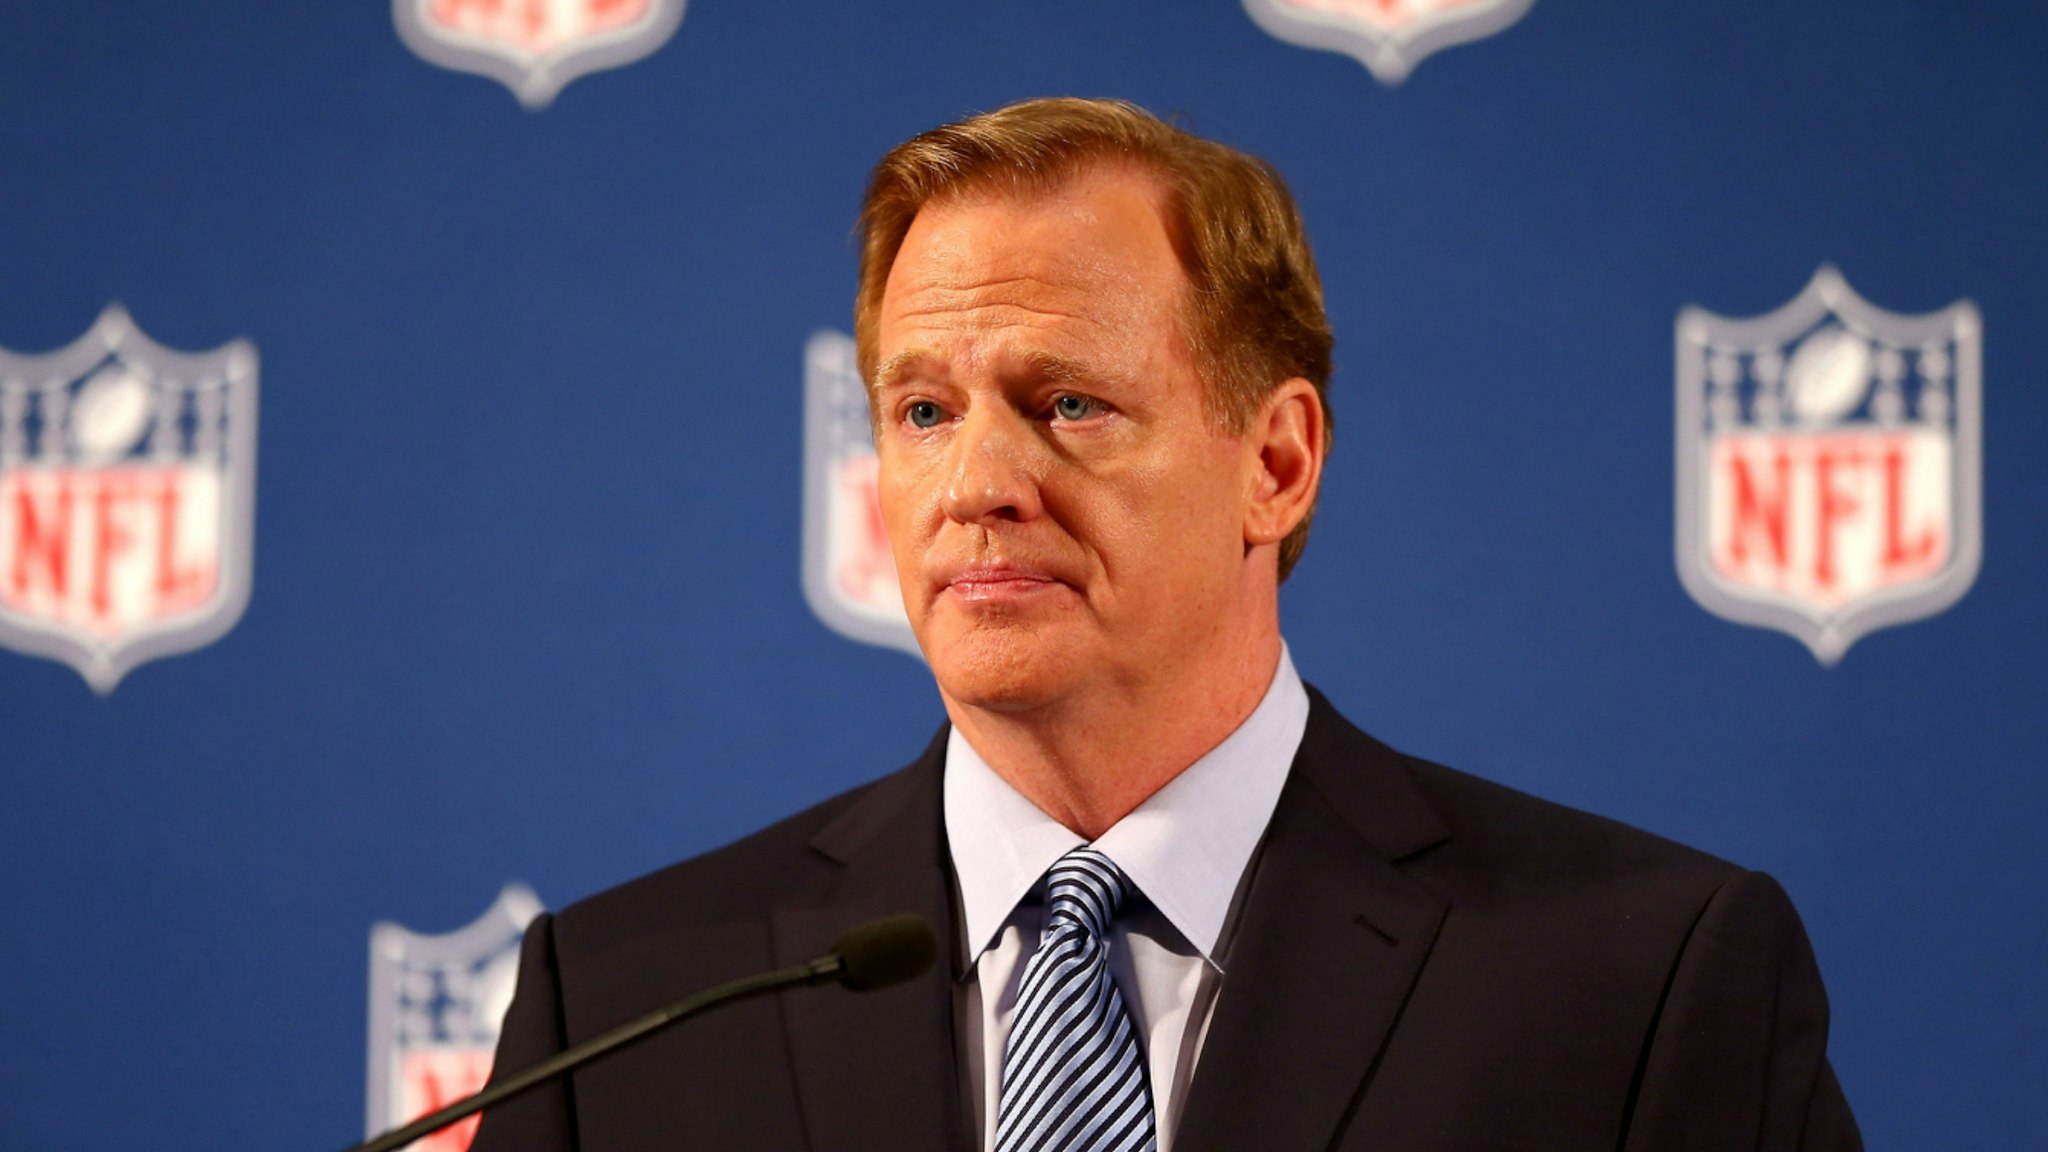 NFL Commissioner Roger Goodell talks during a press conference at the Hilton Hotel on September 19, 2014 in New York City.